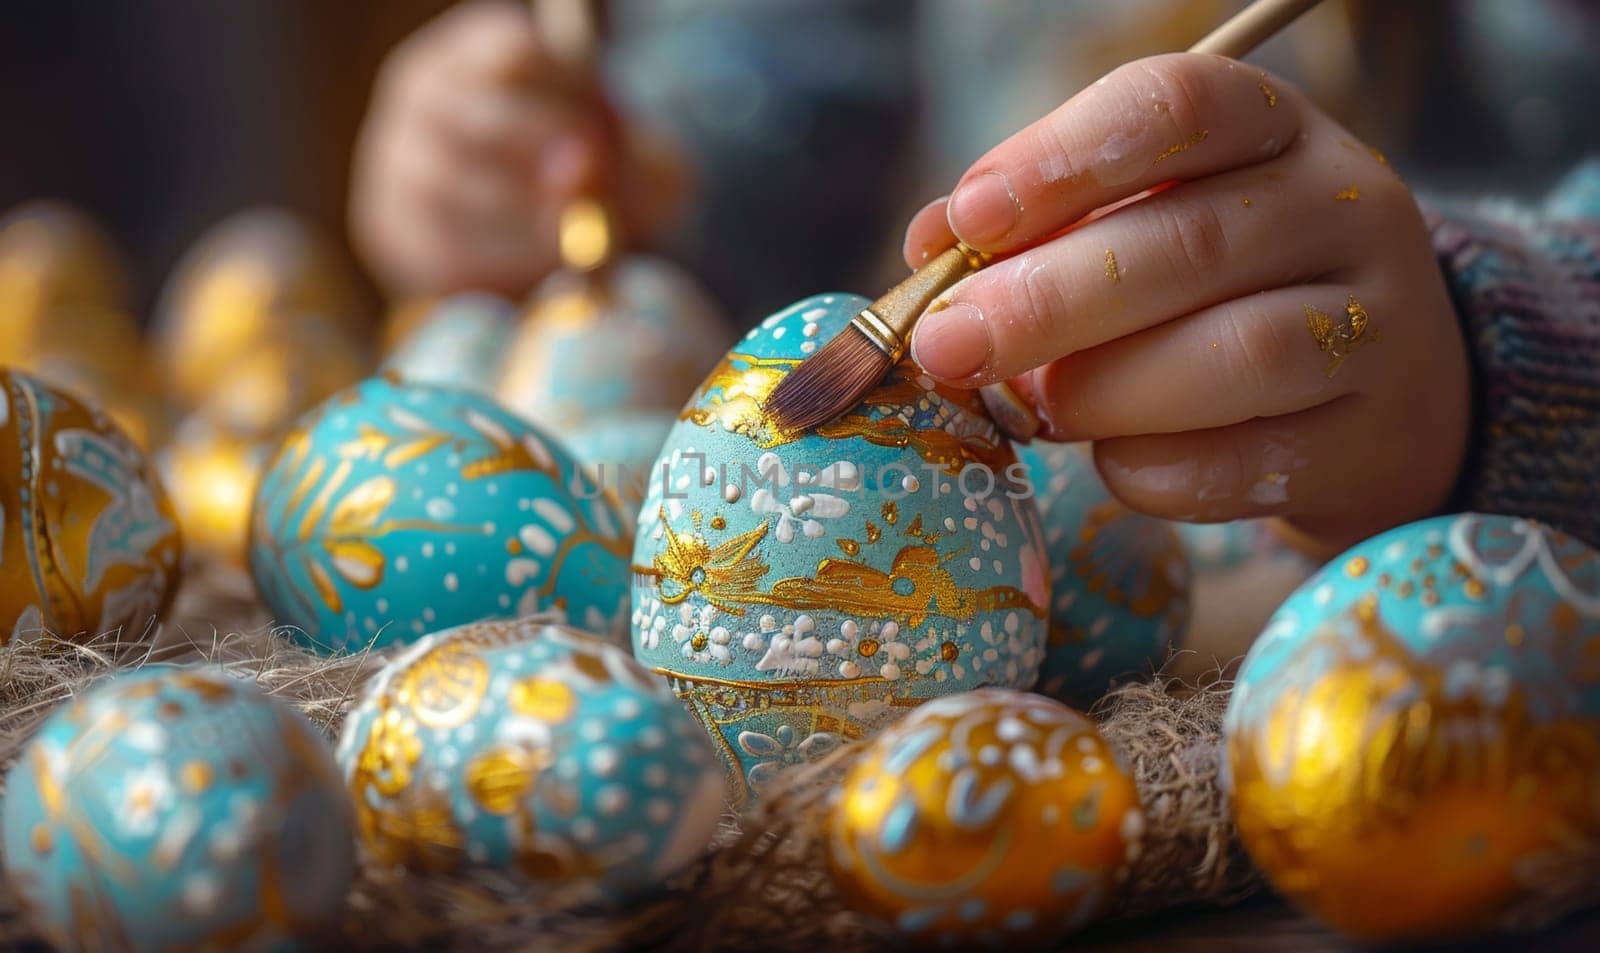 A child is painting eggs with gold and blue paint. The eggs are arranged in a row on a table